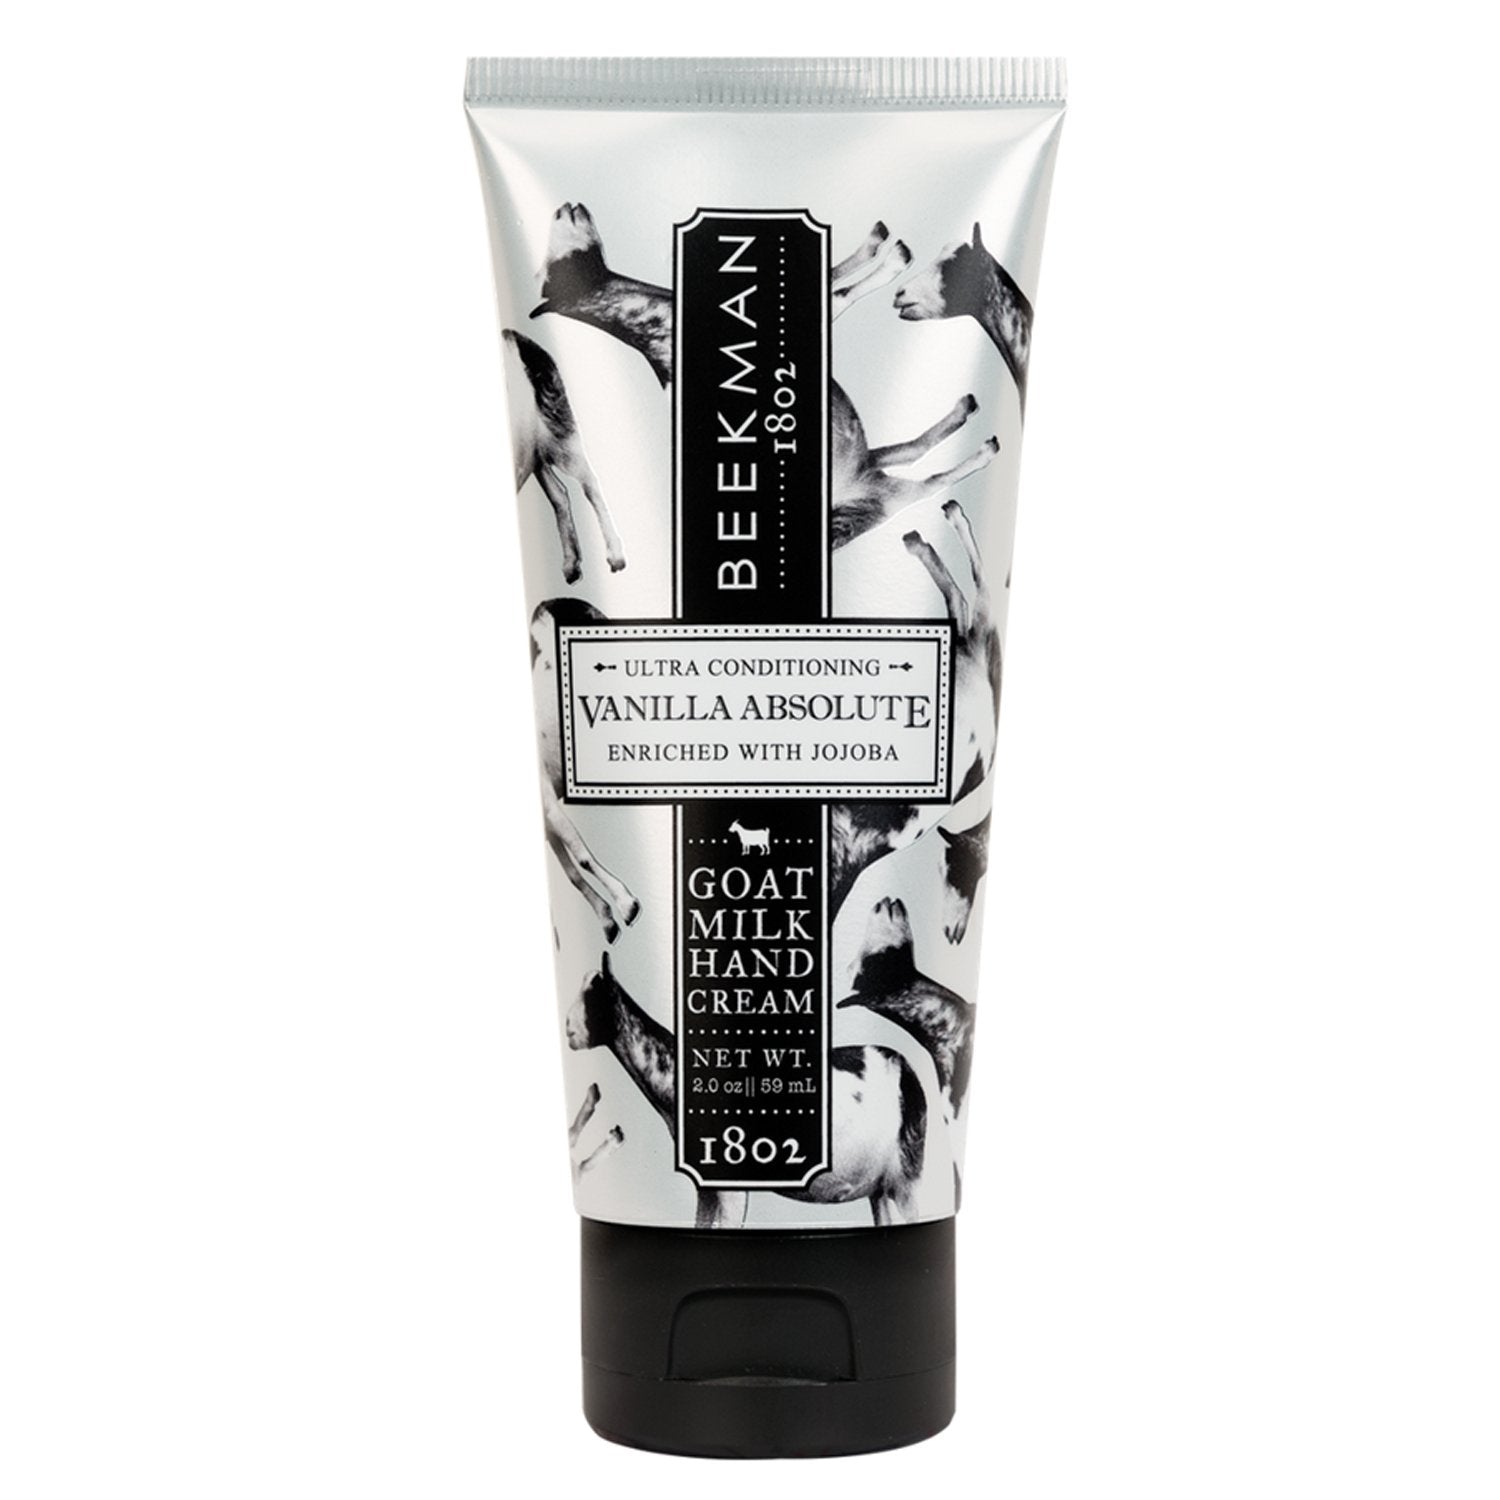 Beekman 1802 Vanilla Absolute Goat Milk Hand Cream - 2.0 Ounces - The Finished Room